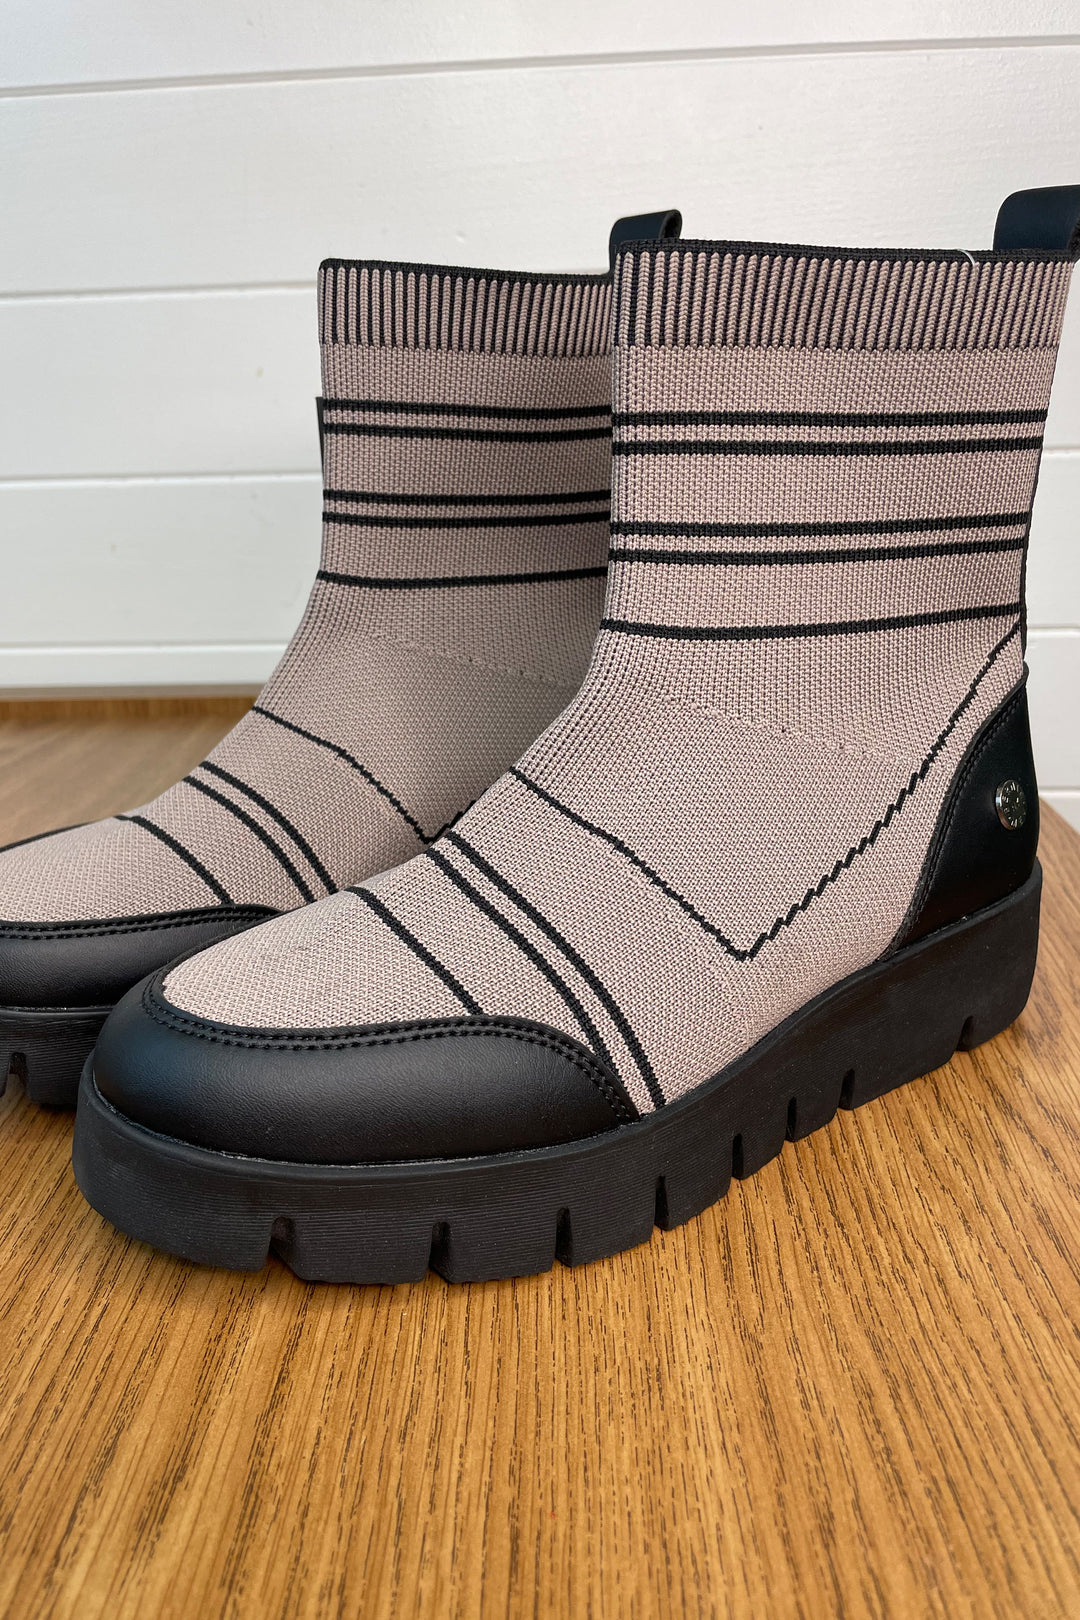 Featuring a lightweight and flexible design, the signature memory foam footbed, removable insole, a stretchy knit upper that wears well, this boot keeps you comfortable and steady this fall and winter. 